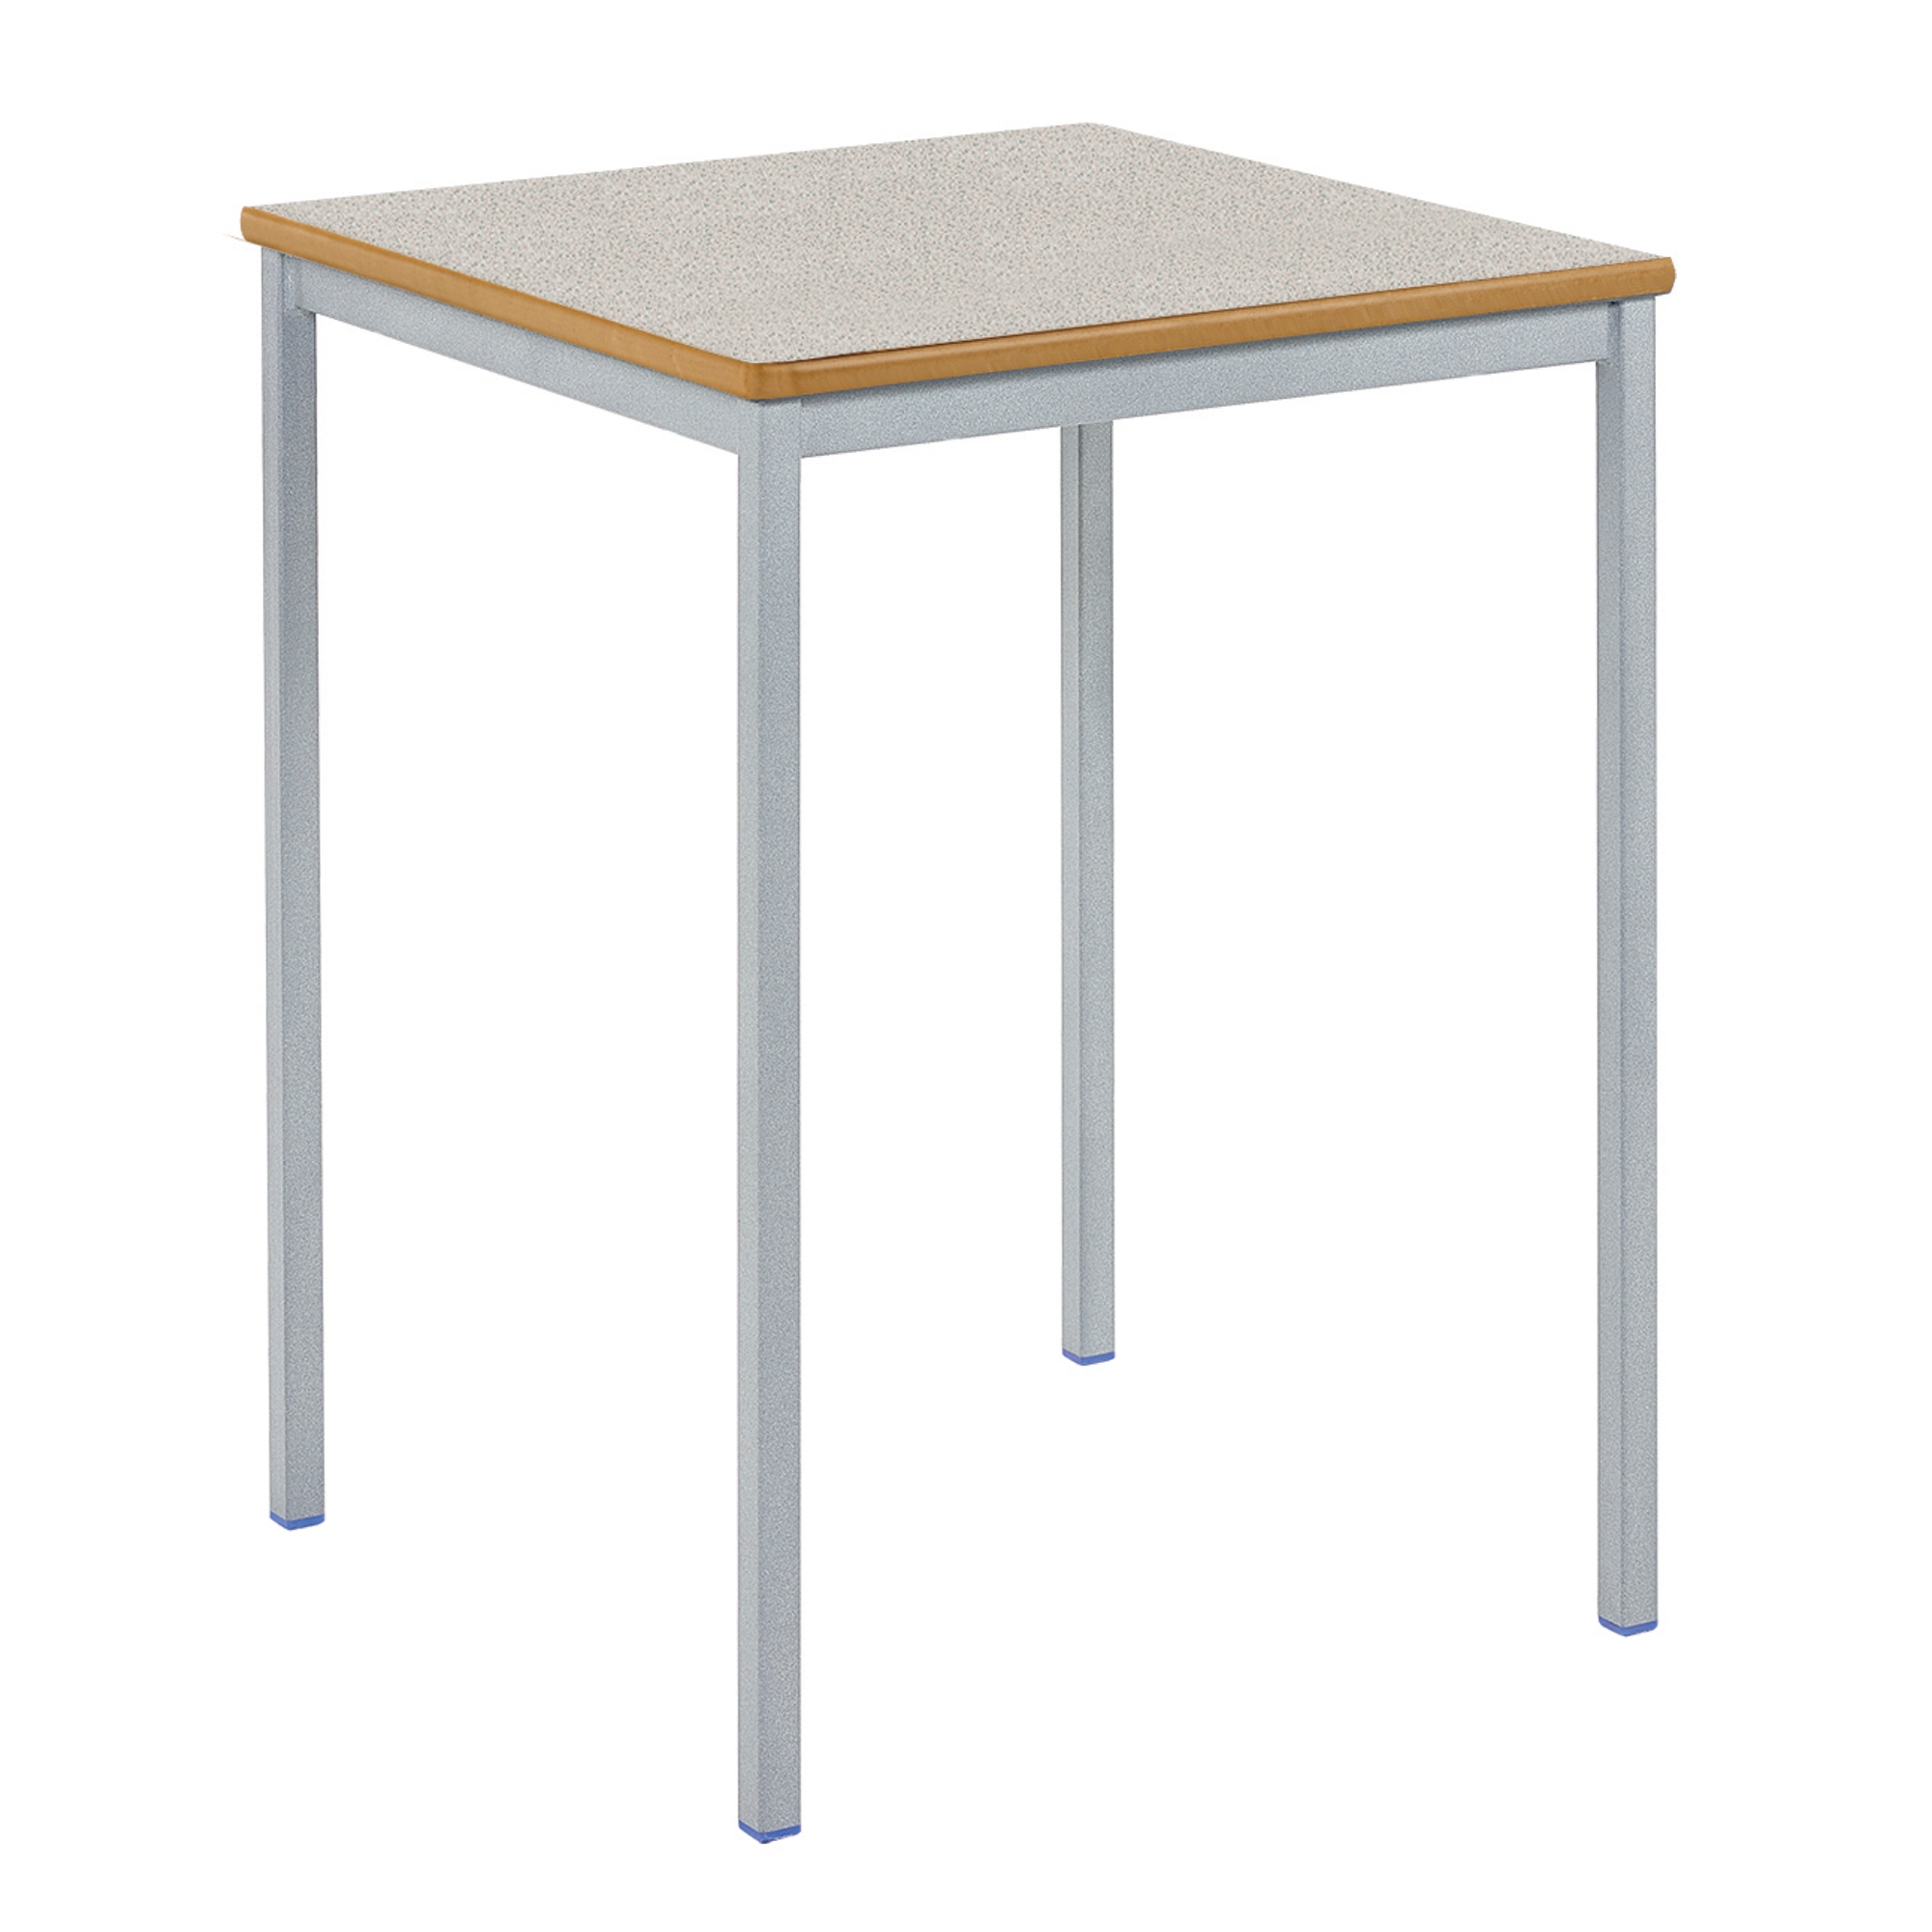 Classmates Square Fully Welded Classroom Table - 600 x 600 x 530mm - Ailsa